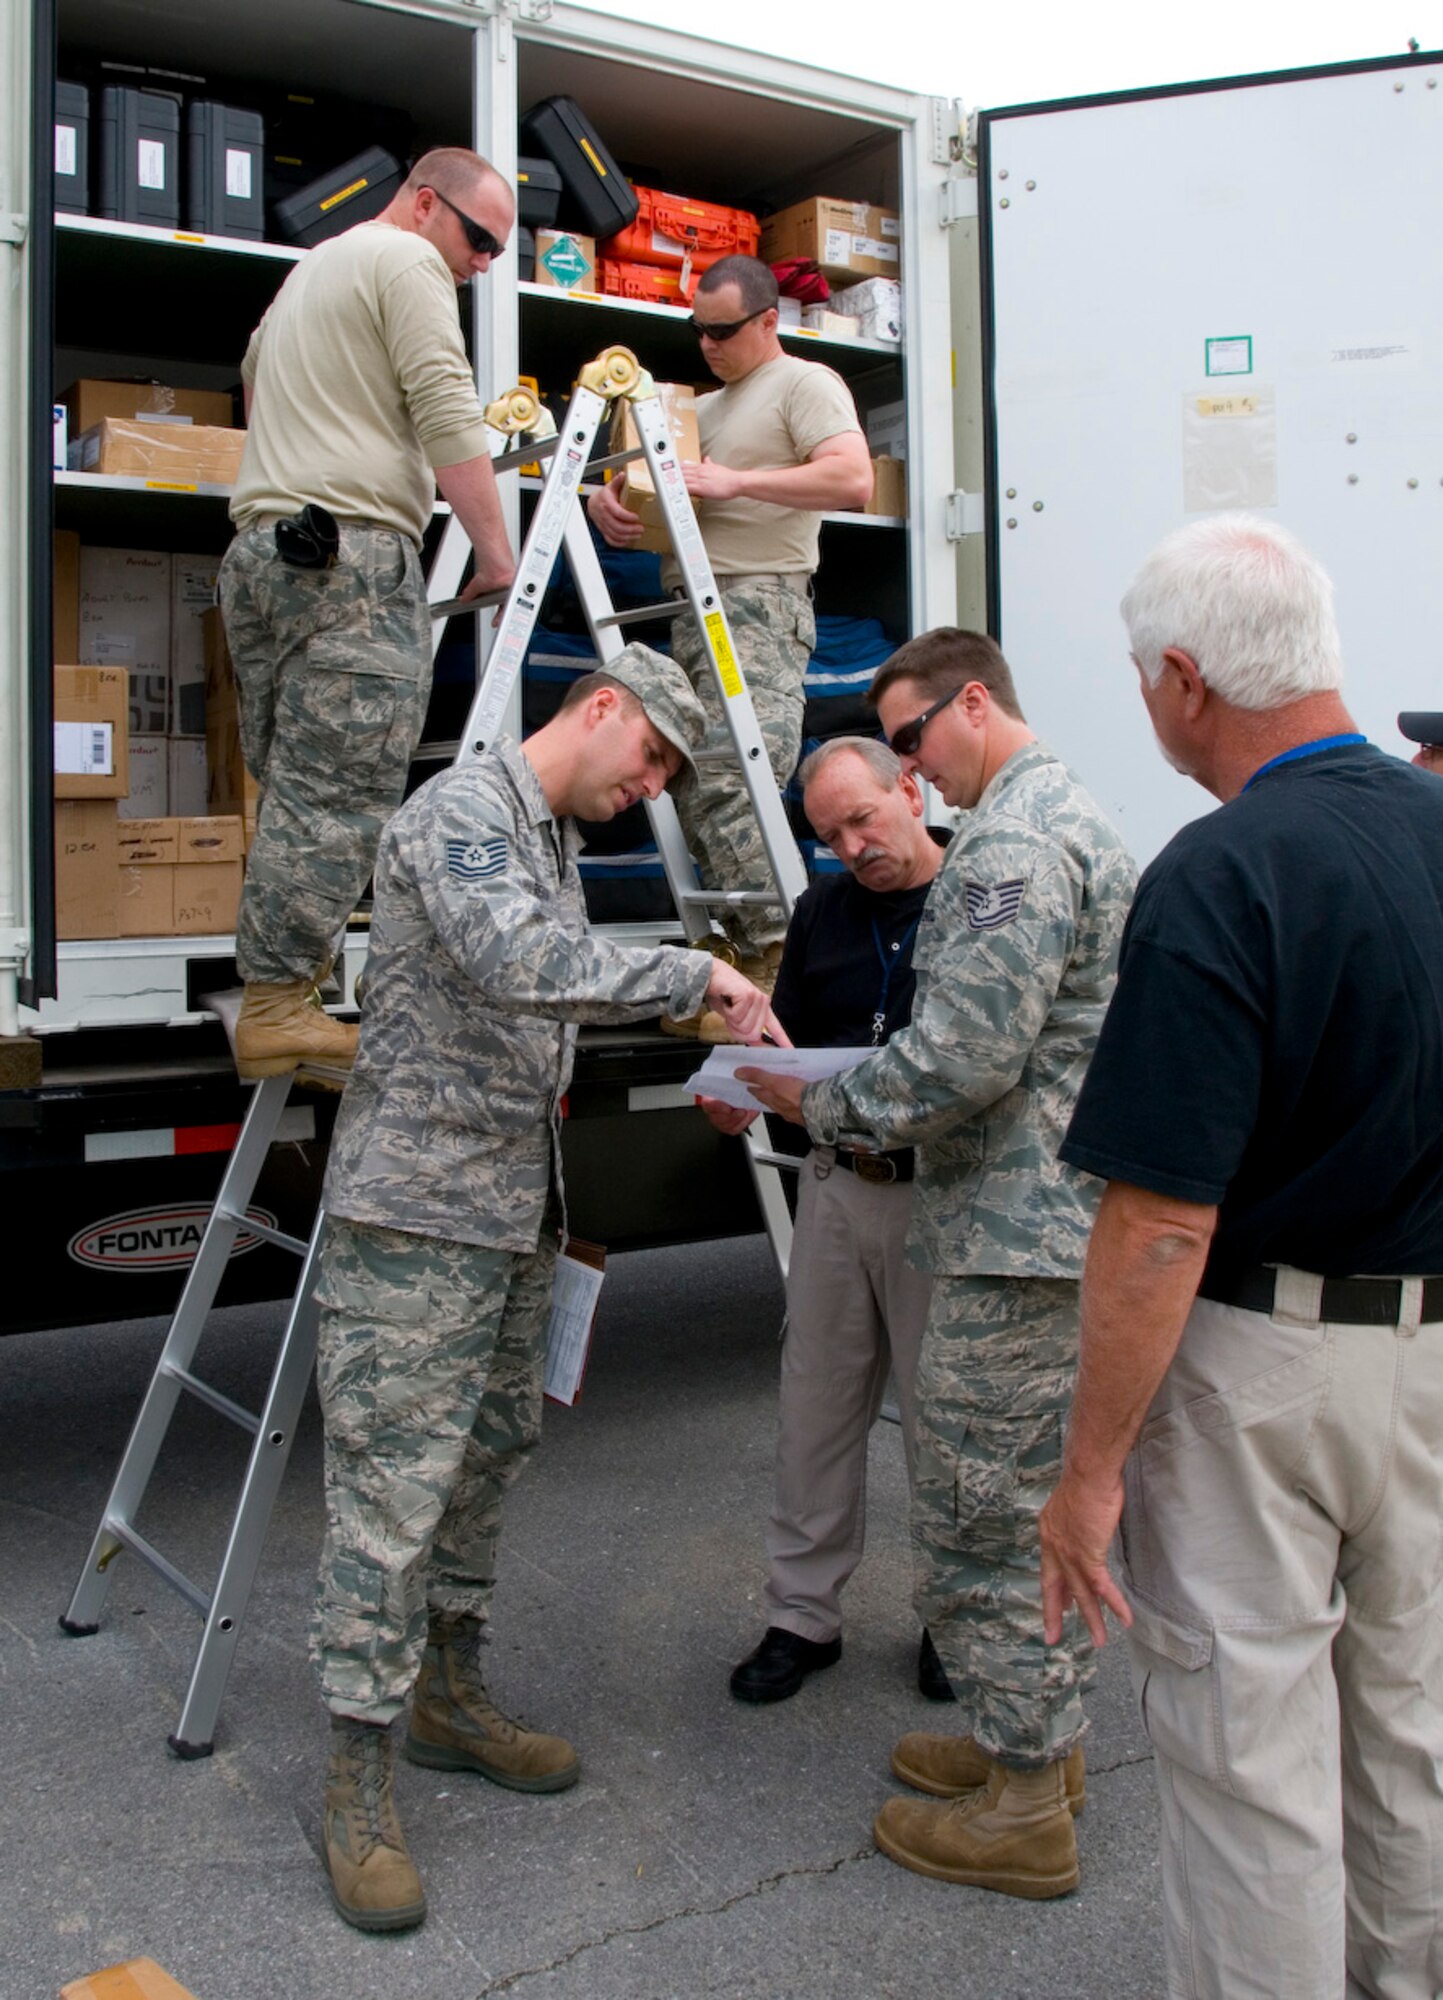 – Members of the West Virginia Air National Guard’s 167th Airlift Wing and Federal Emergency Management Agency held a joint inspection exercise at the air base here May 12 to ensure that if a disaster strikes anywhere in the world, equipment and supplies can be delivered expeditiously and safely. (U.S. Air Force photo by Emily Beightol-Deyerle)